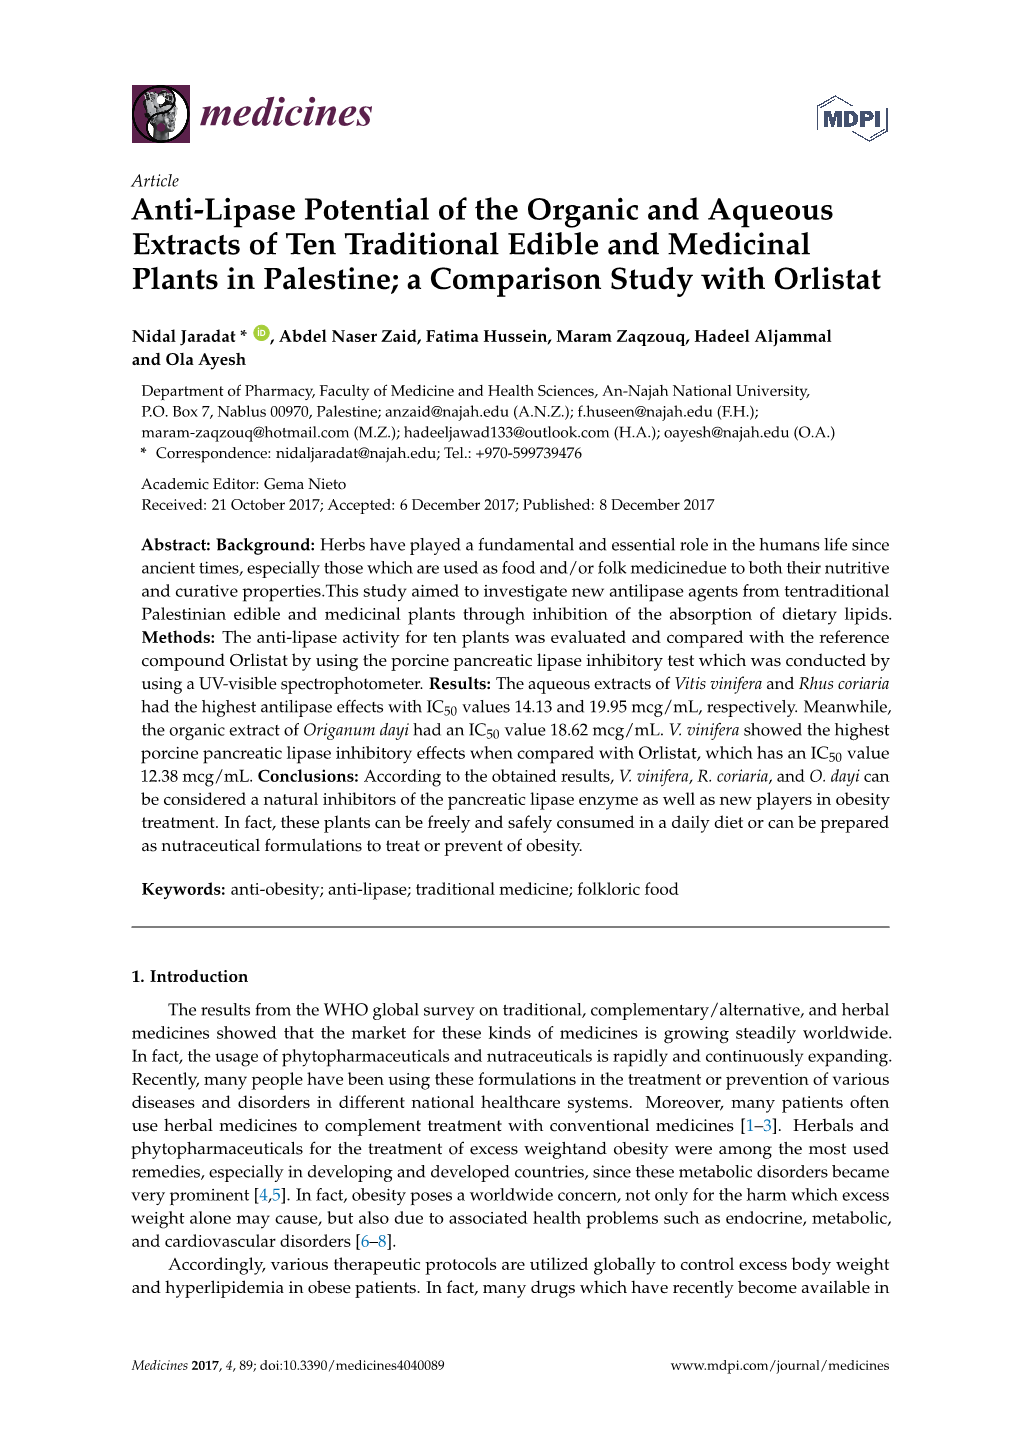 Anti-Lipase Potential of the Organic and Aqueous Extracts of Ten Traditional Edible and Medicinal Plants in Palestine; a Comparison Study with Orlistat